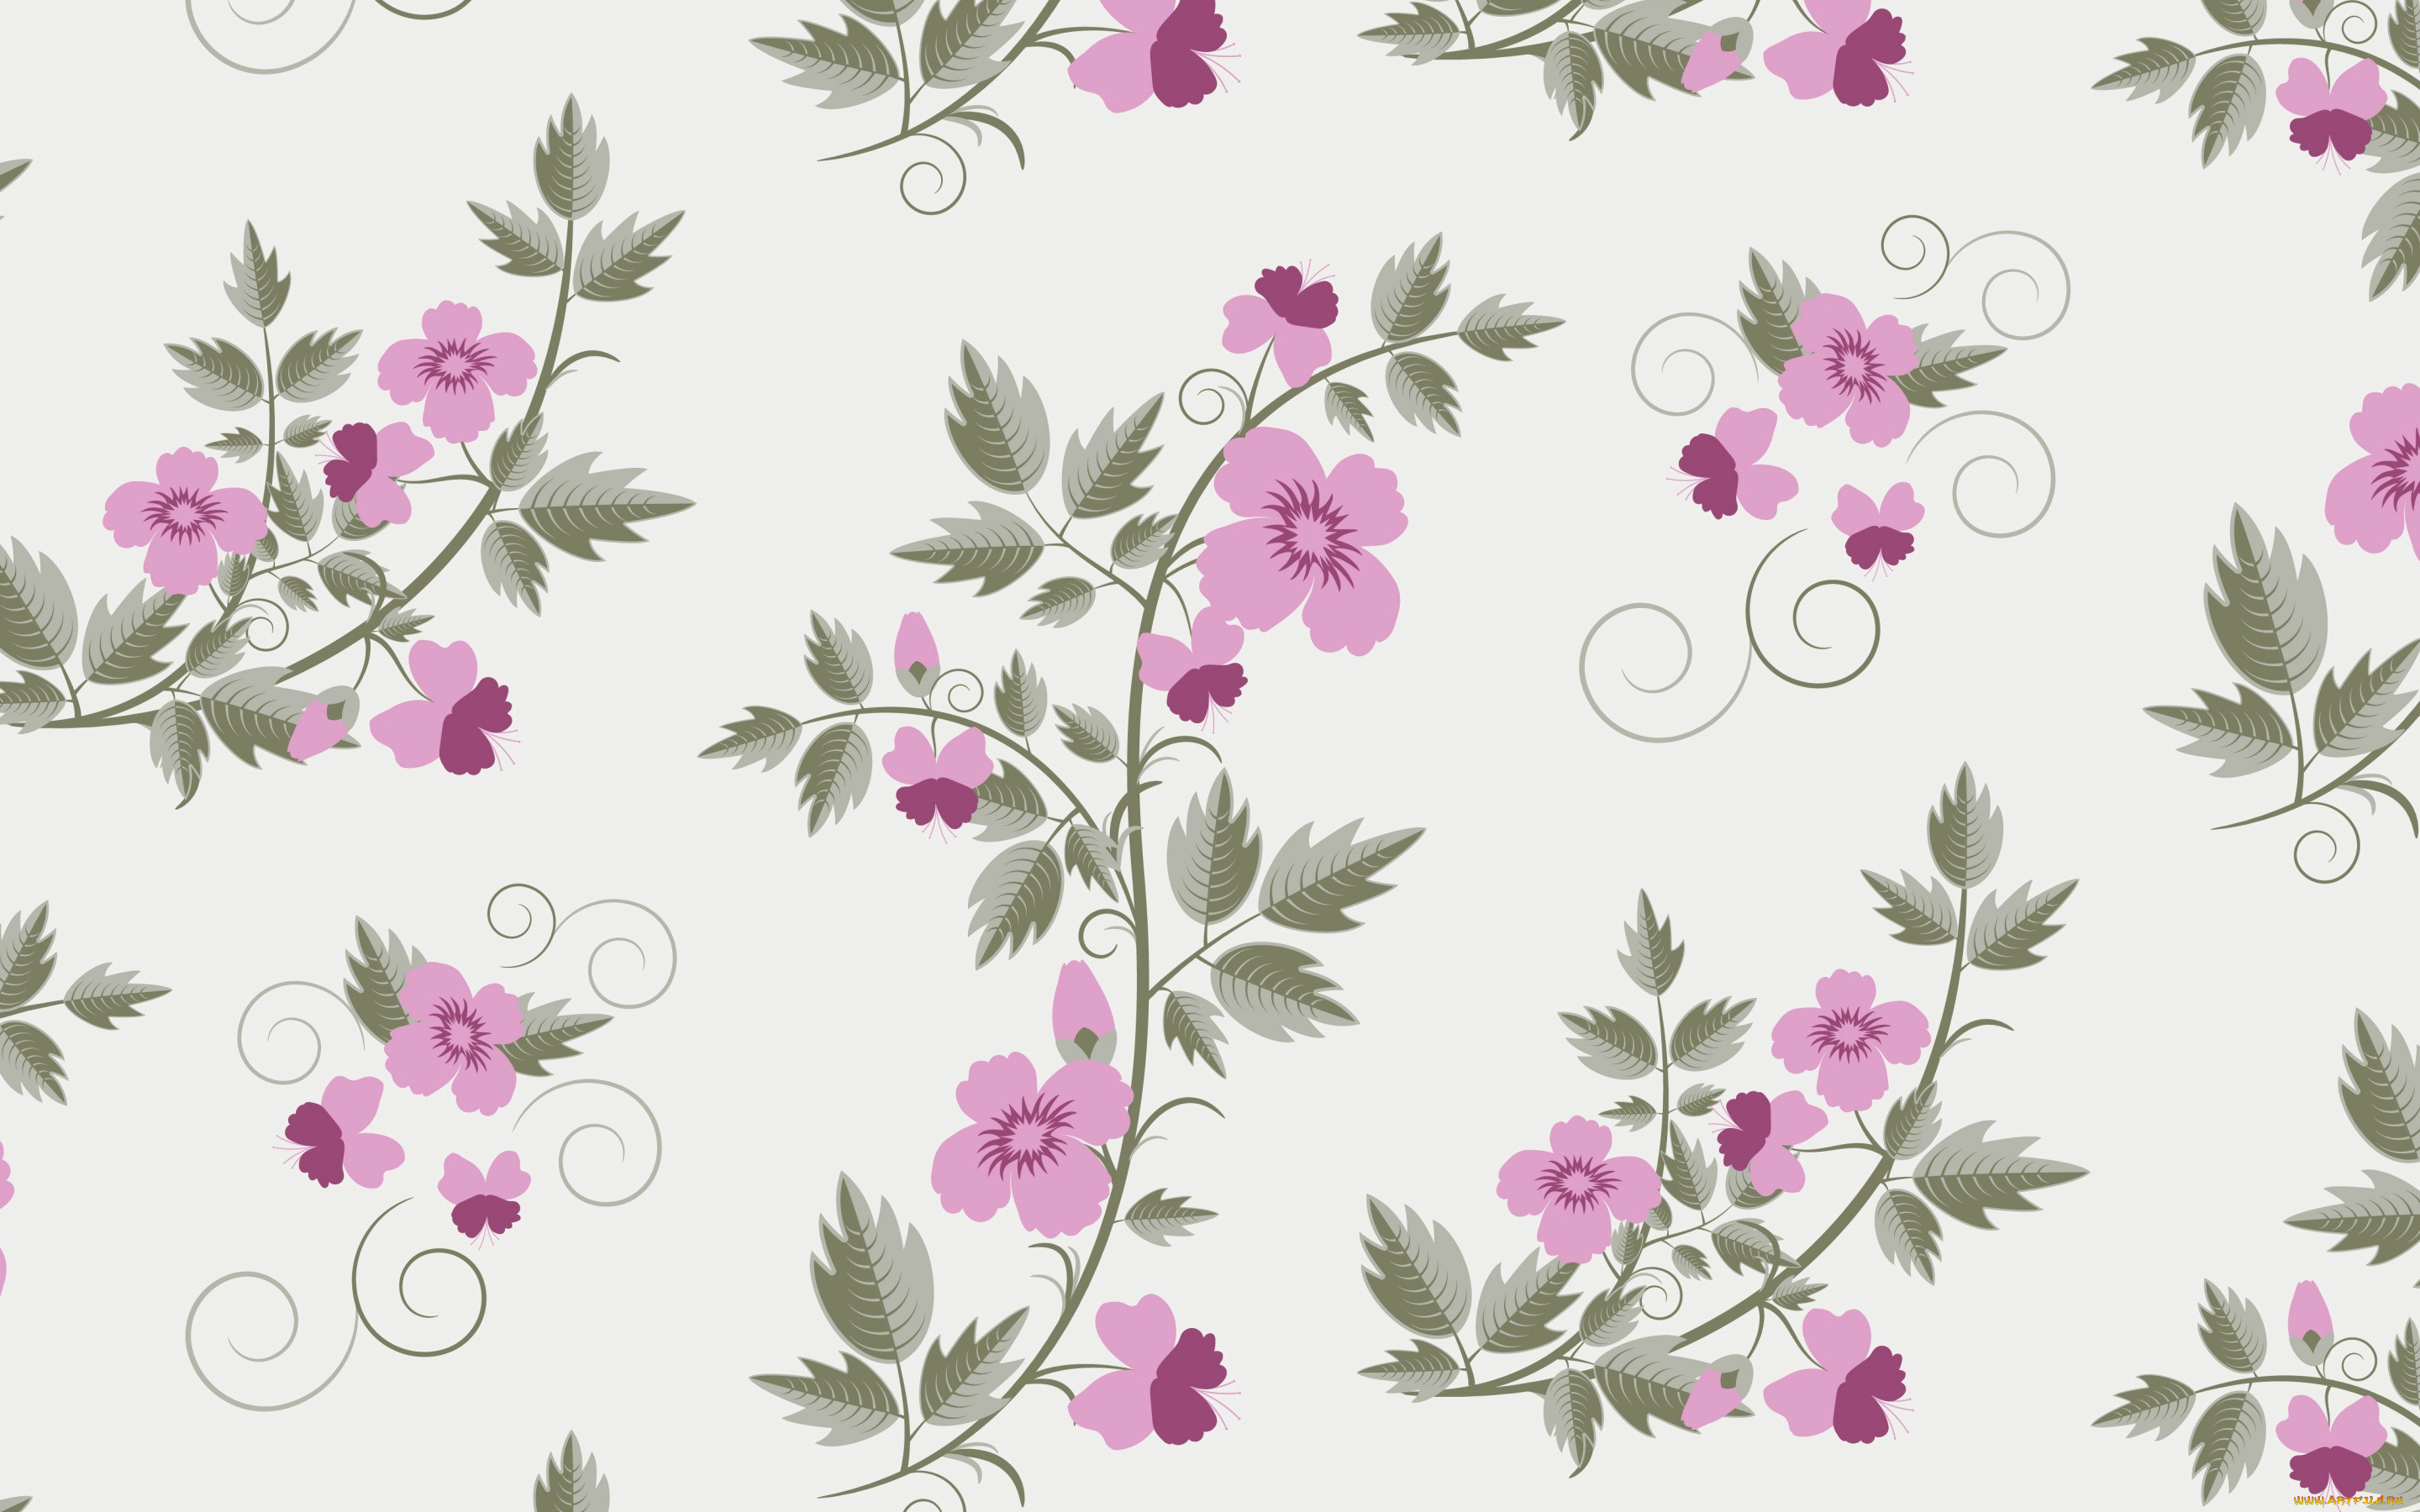  ,  , flowers, vector, retro, pattern, , floral, with